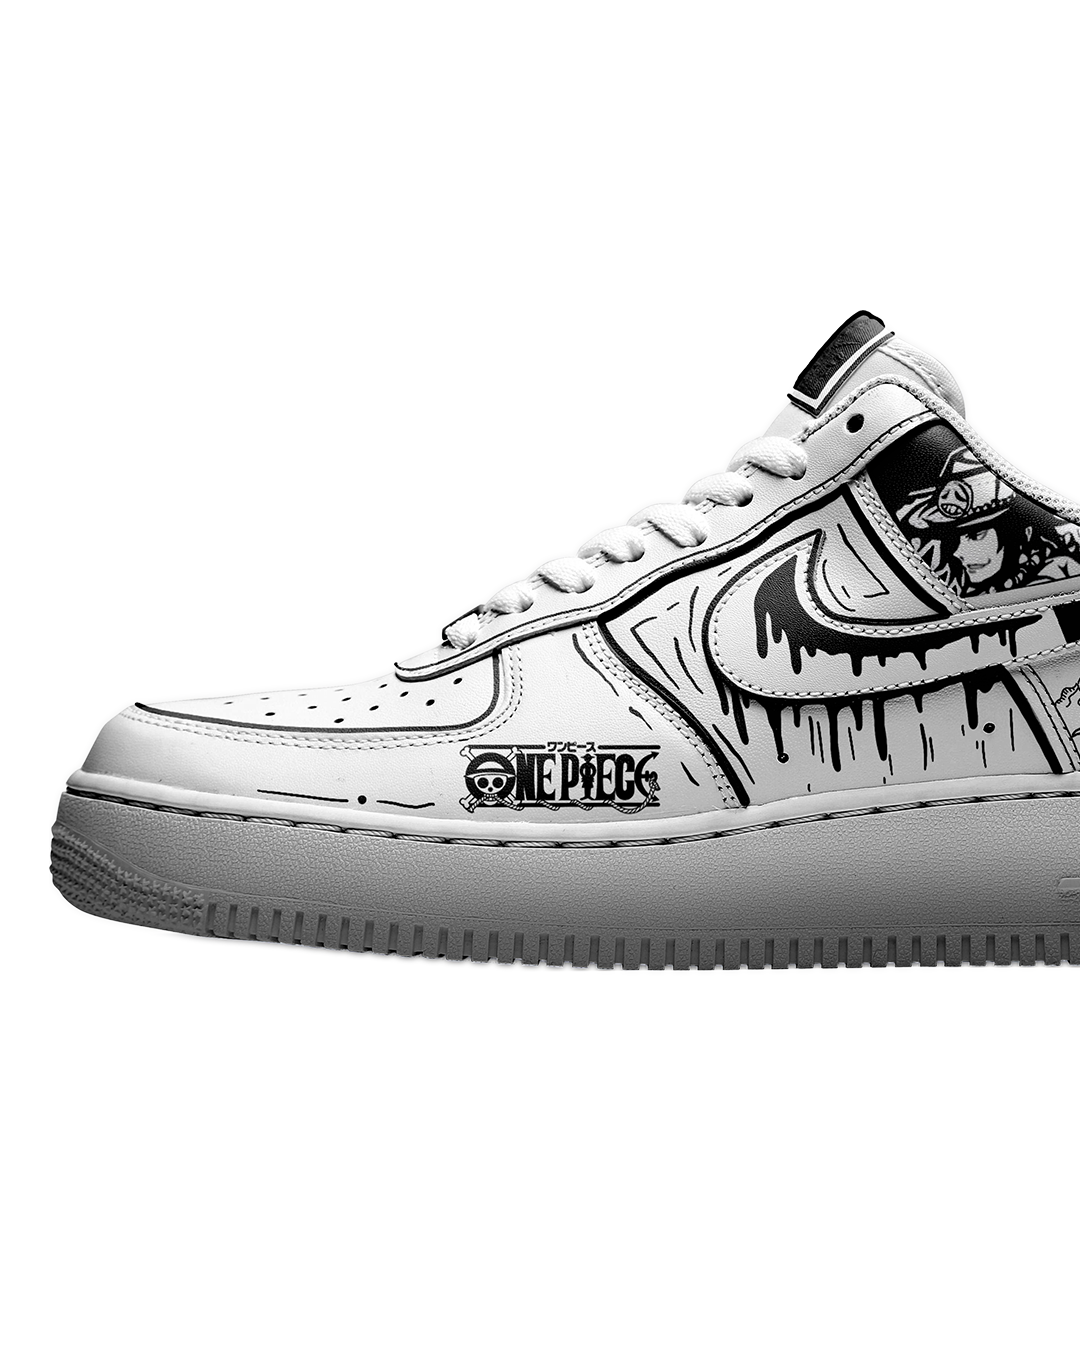 Nike Air Force 1 'One Piece'